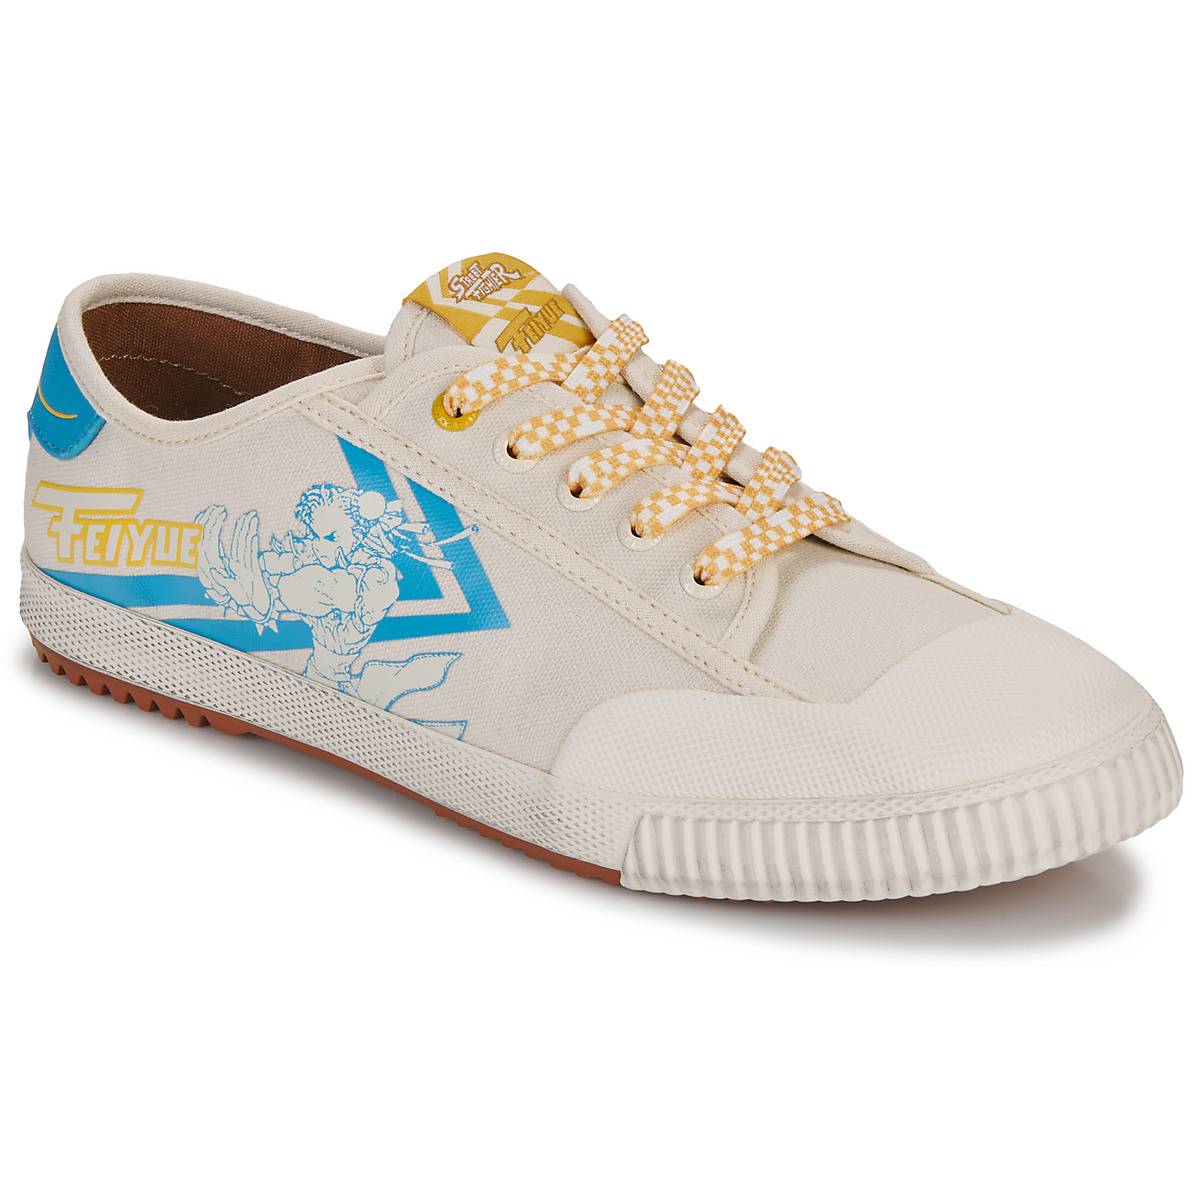 Chaussures Homme Duck And Cover Fe Lo 1920 Street Fighter Blanc / Bleu / Jaune